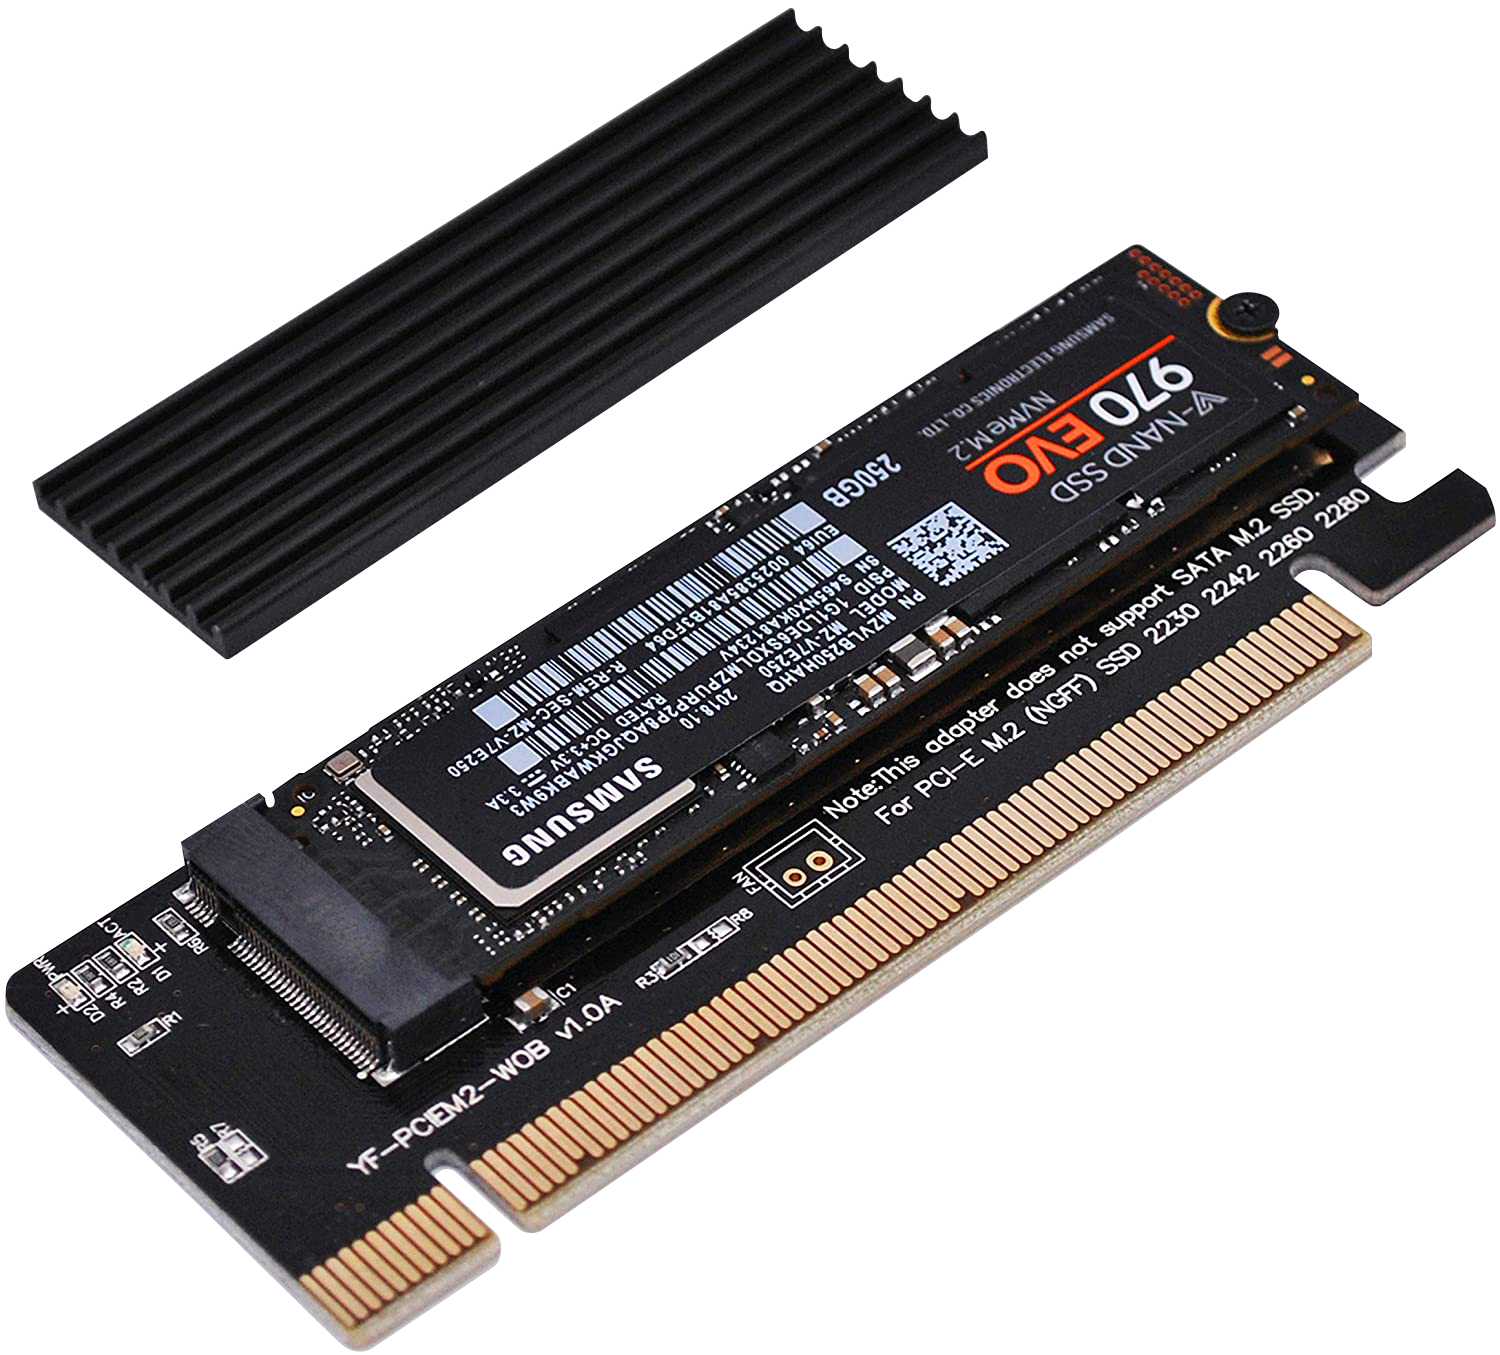 Adapter, M.2 to U.2 - M.2 PCIe NVMe SSDs - Drive Adapters and